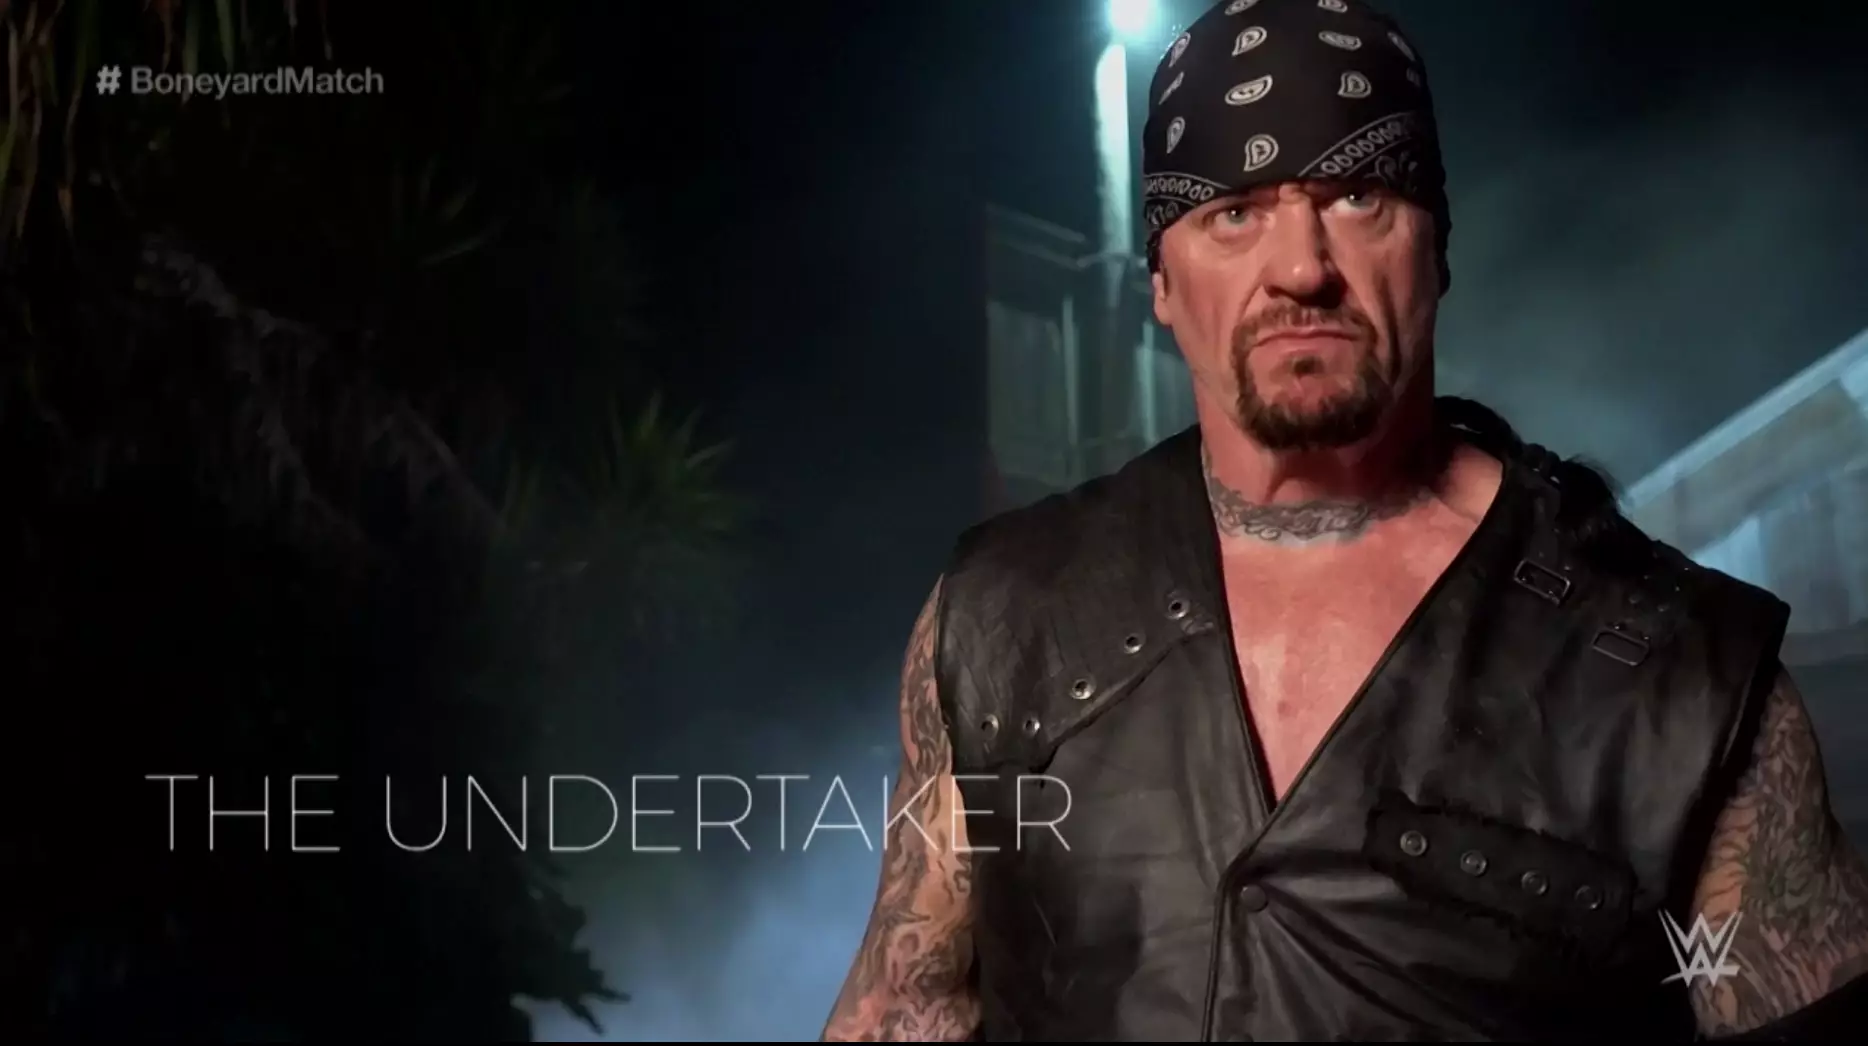 The Undertaker sent fans into meltdown with his performance in the Boneyard Match. (Image